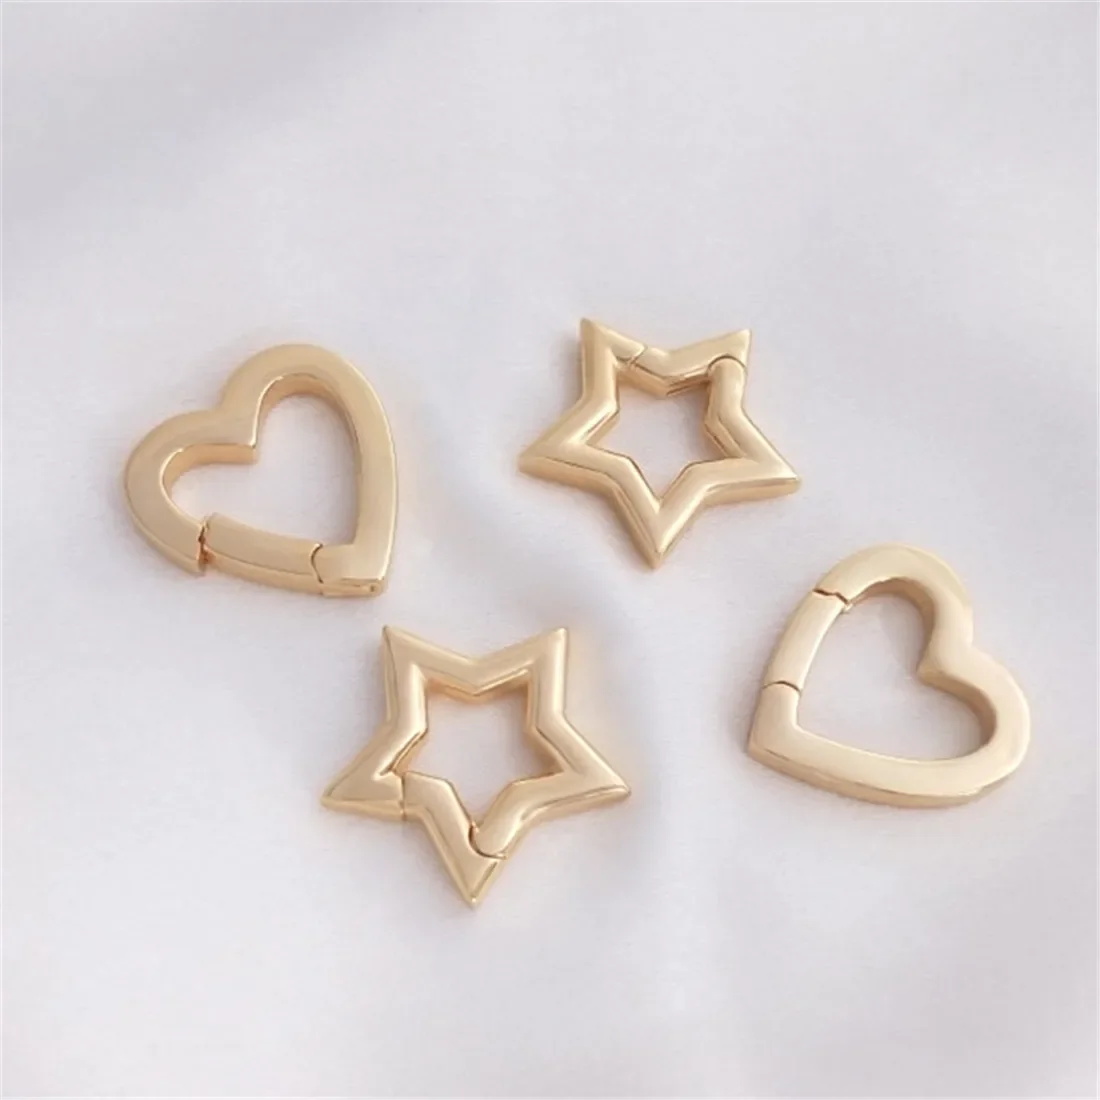 

Universal Buckle 14K Gold Peach Heart Shaped Five Pointed Star Spring Buckle Pendant DIY Necklace Connecting Accessories B956